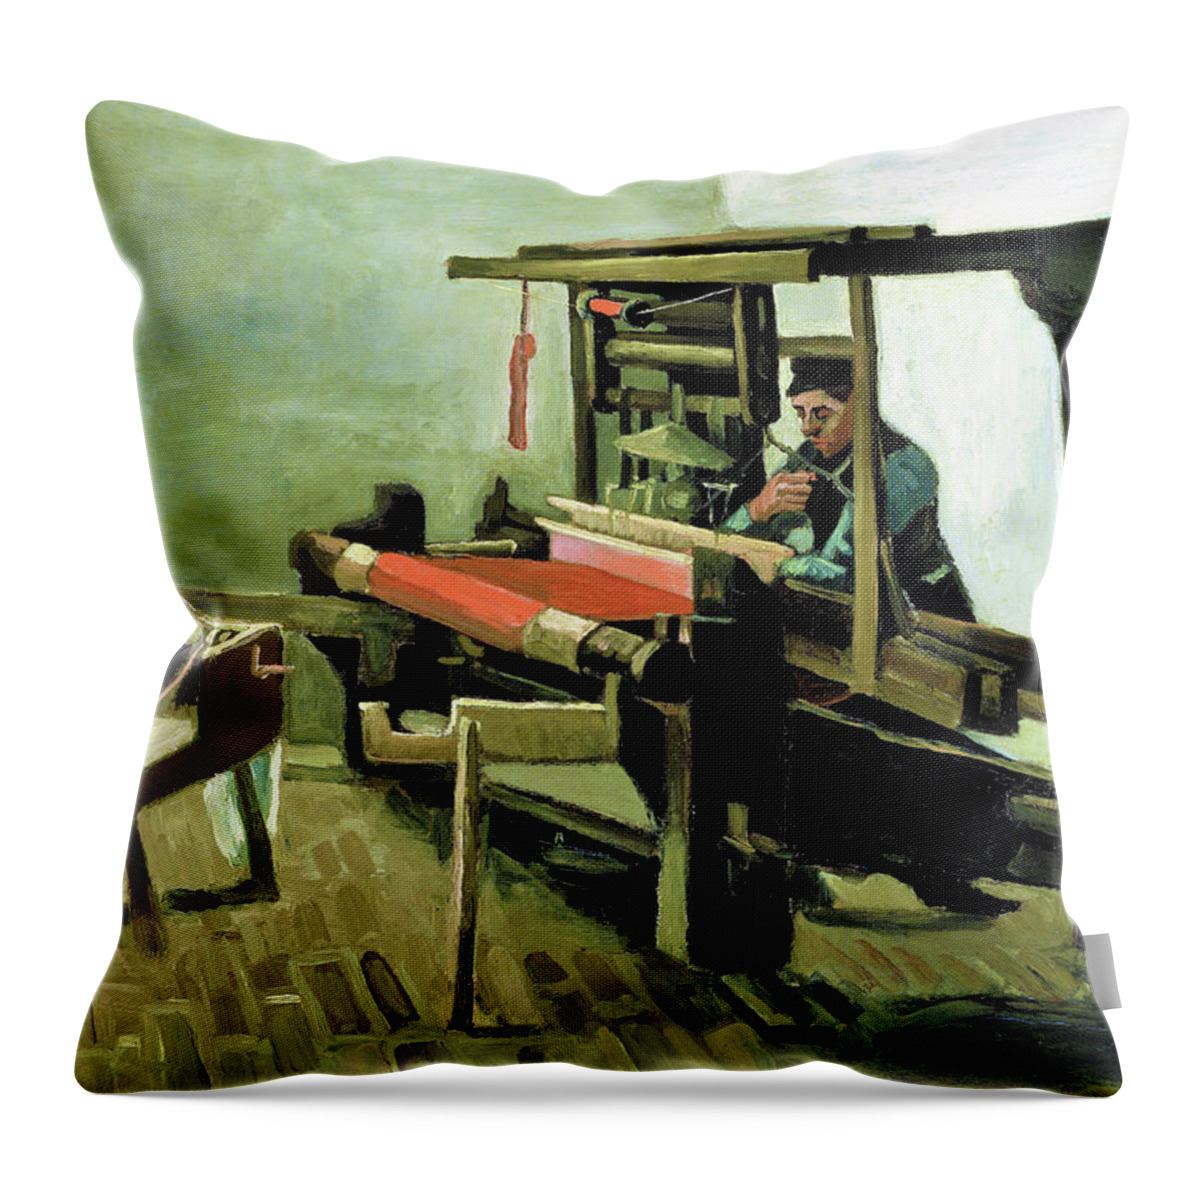 Weaver Throw Pillow featuring the painting Weaver - Digital Remastered Edition #2 by Vincent van Gogh